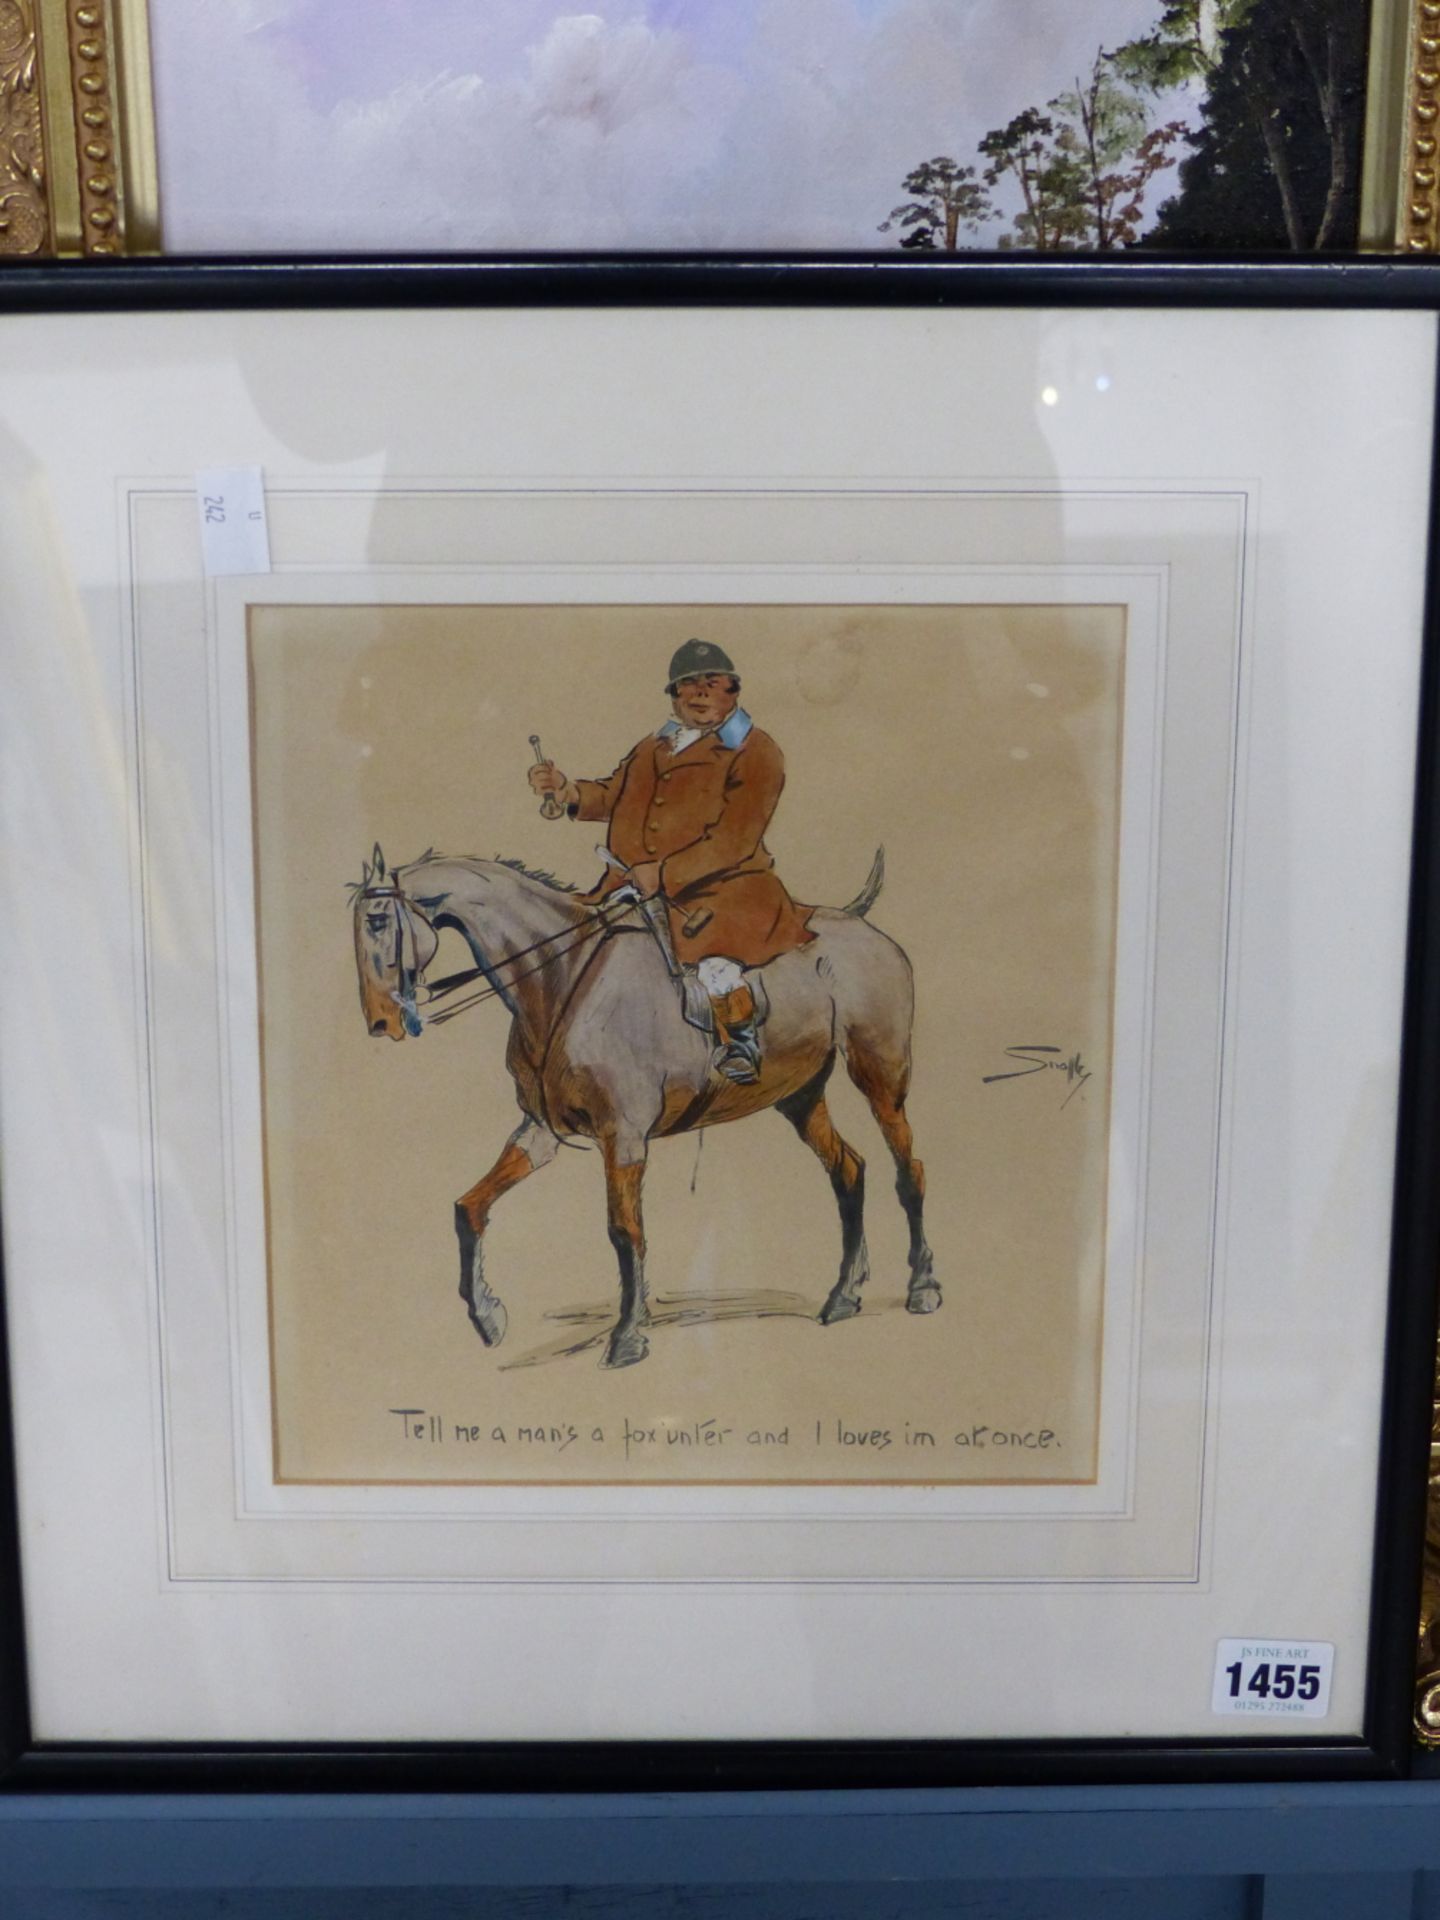 SNAFFLES (CHARLES JOHNSON PAYNE) A COMIC PORTRAIT OF A HUNTSMAN, INSCRIBED TELL ME A MAN'S A FOX' ' - Image 3 of 7